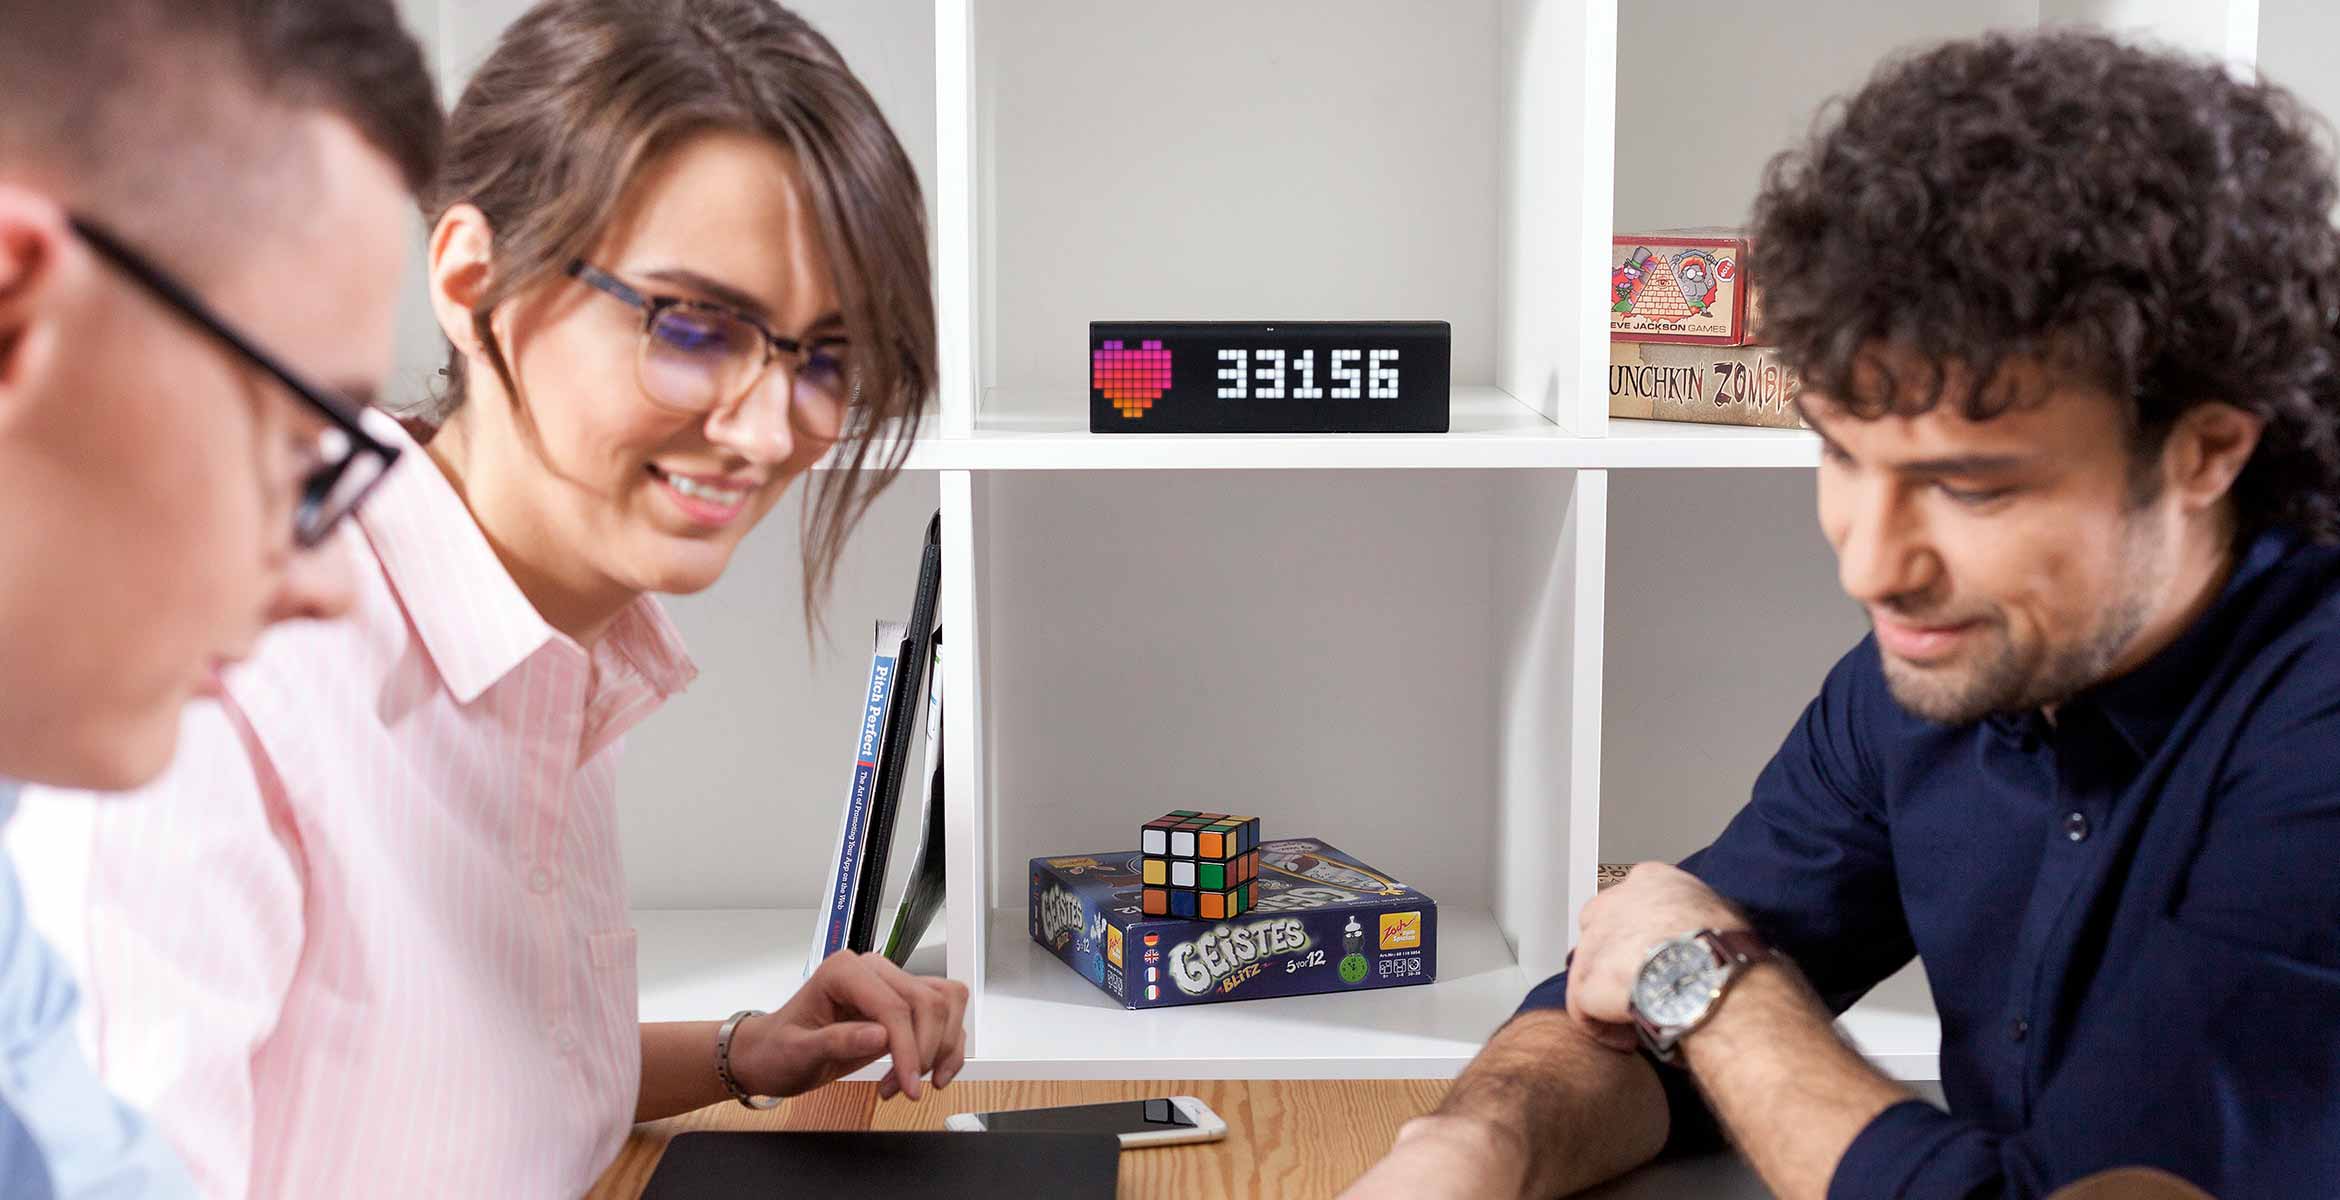 LaMetric Time smart clock, placed in a shelf, displays people follower count for the Instagram